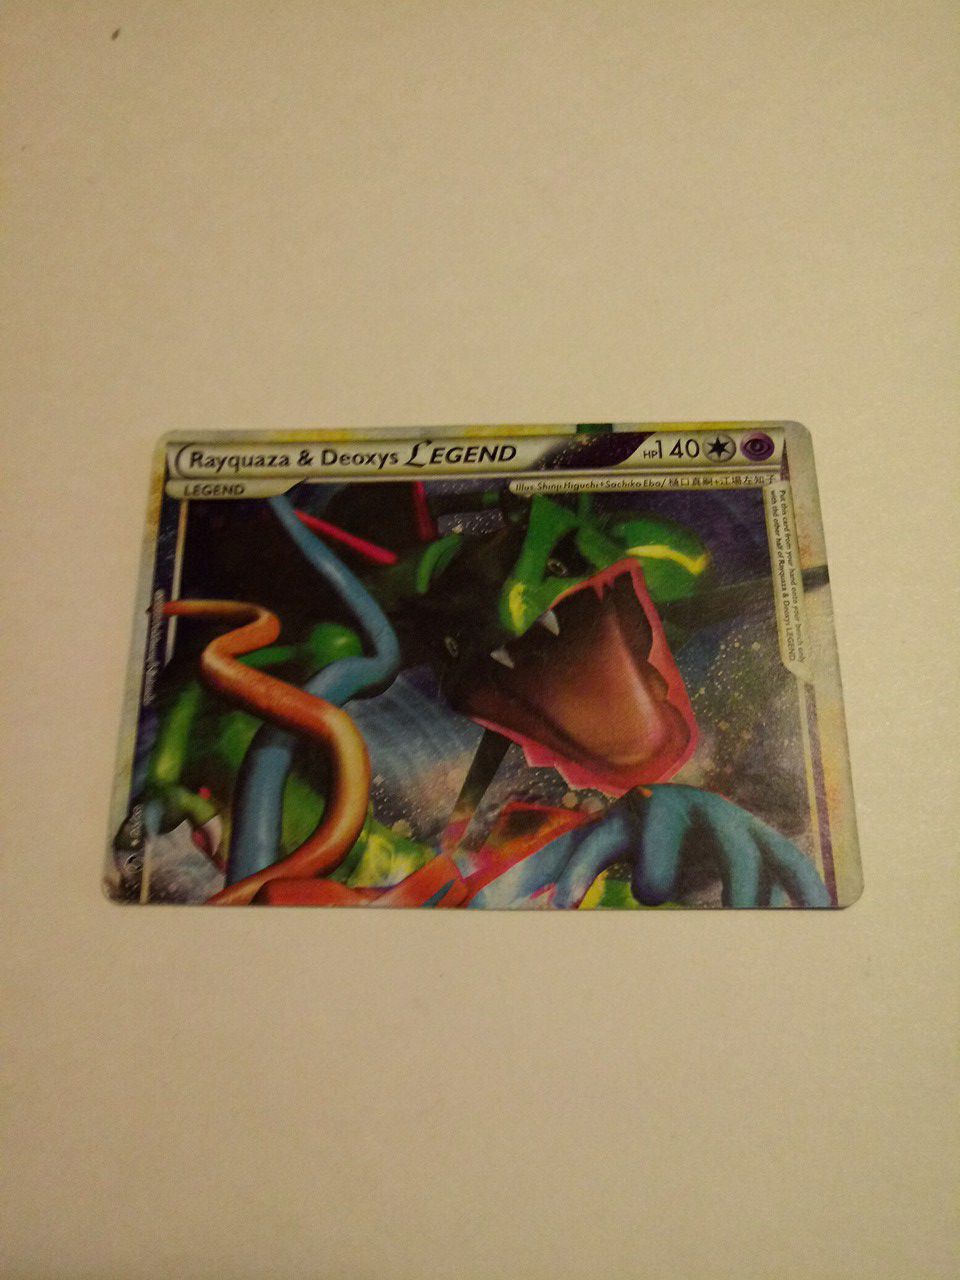 Rayquaza & Deoxys legend pokemon cards 89/90